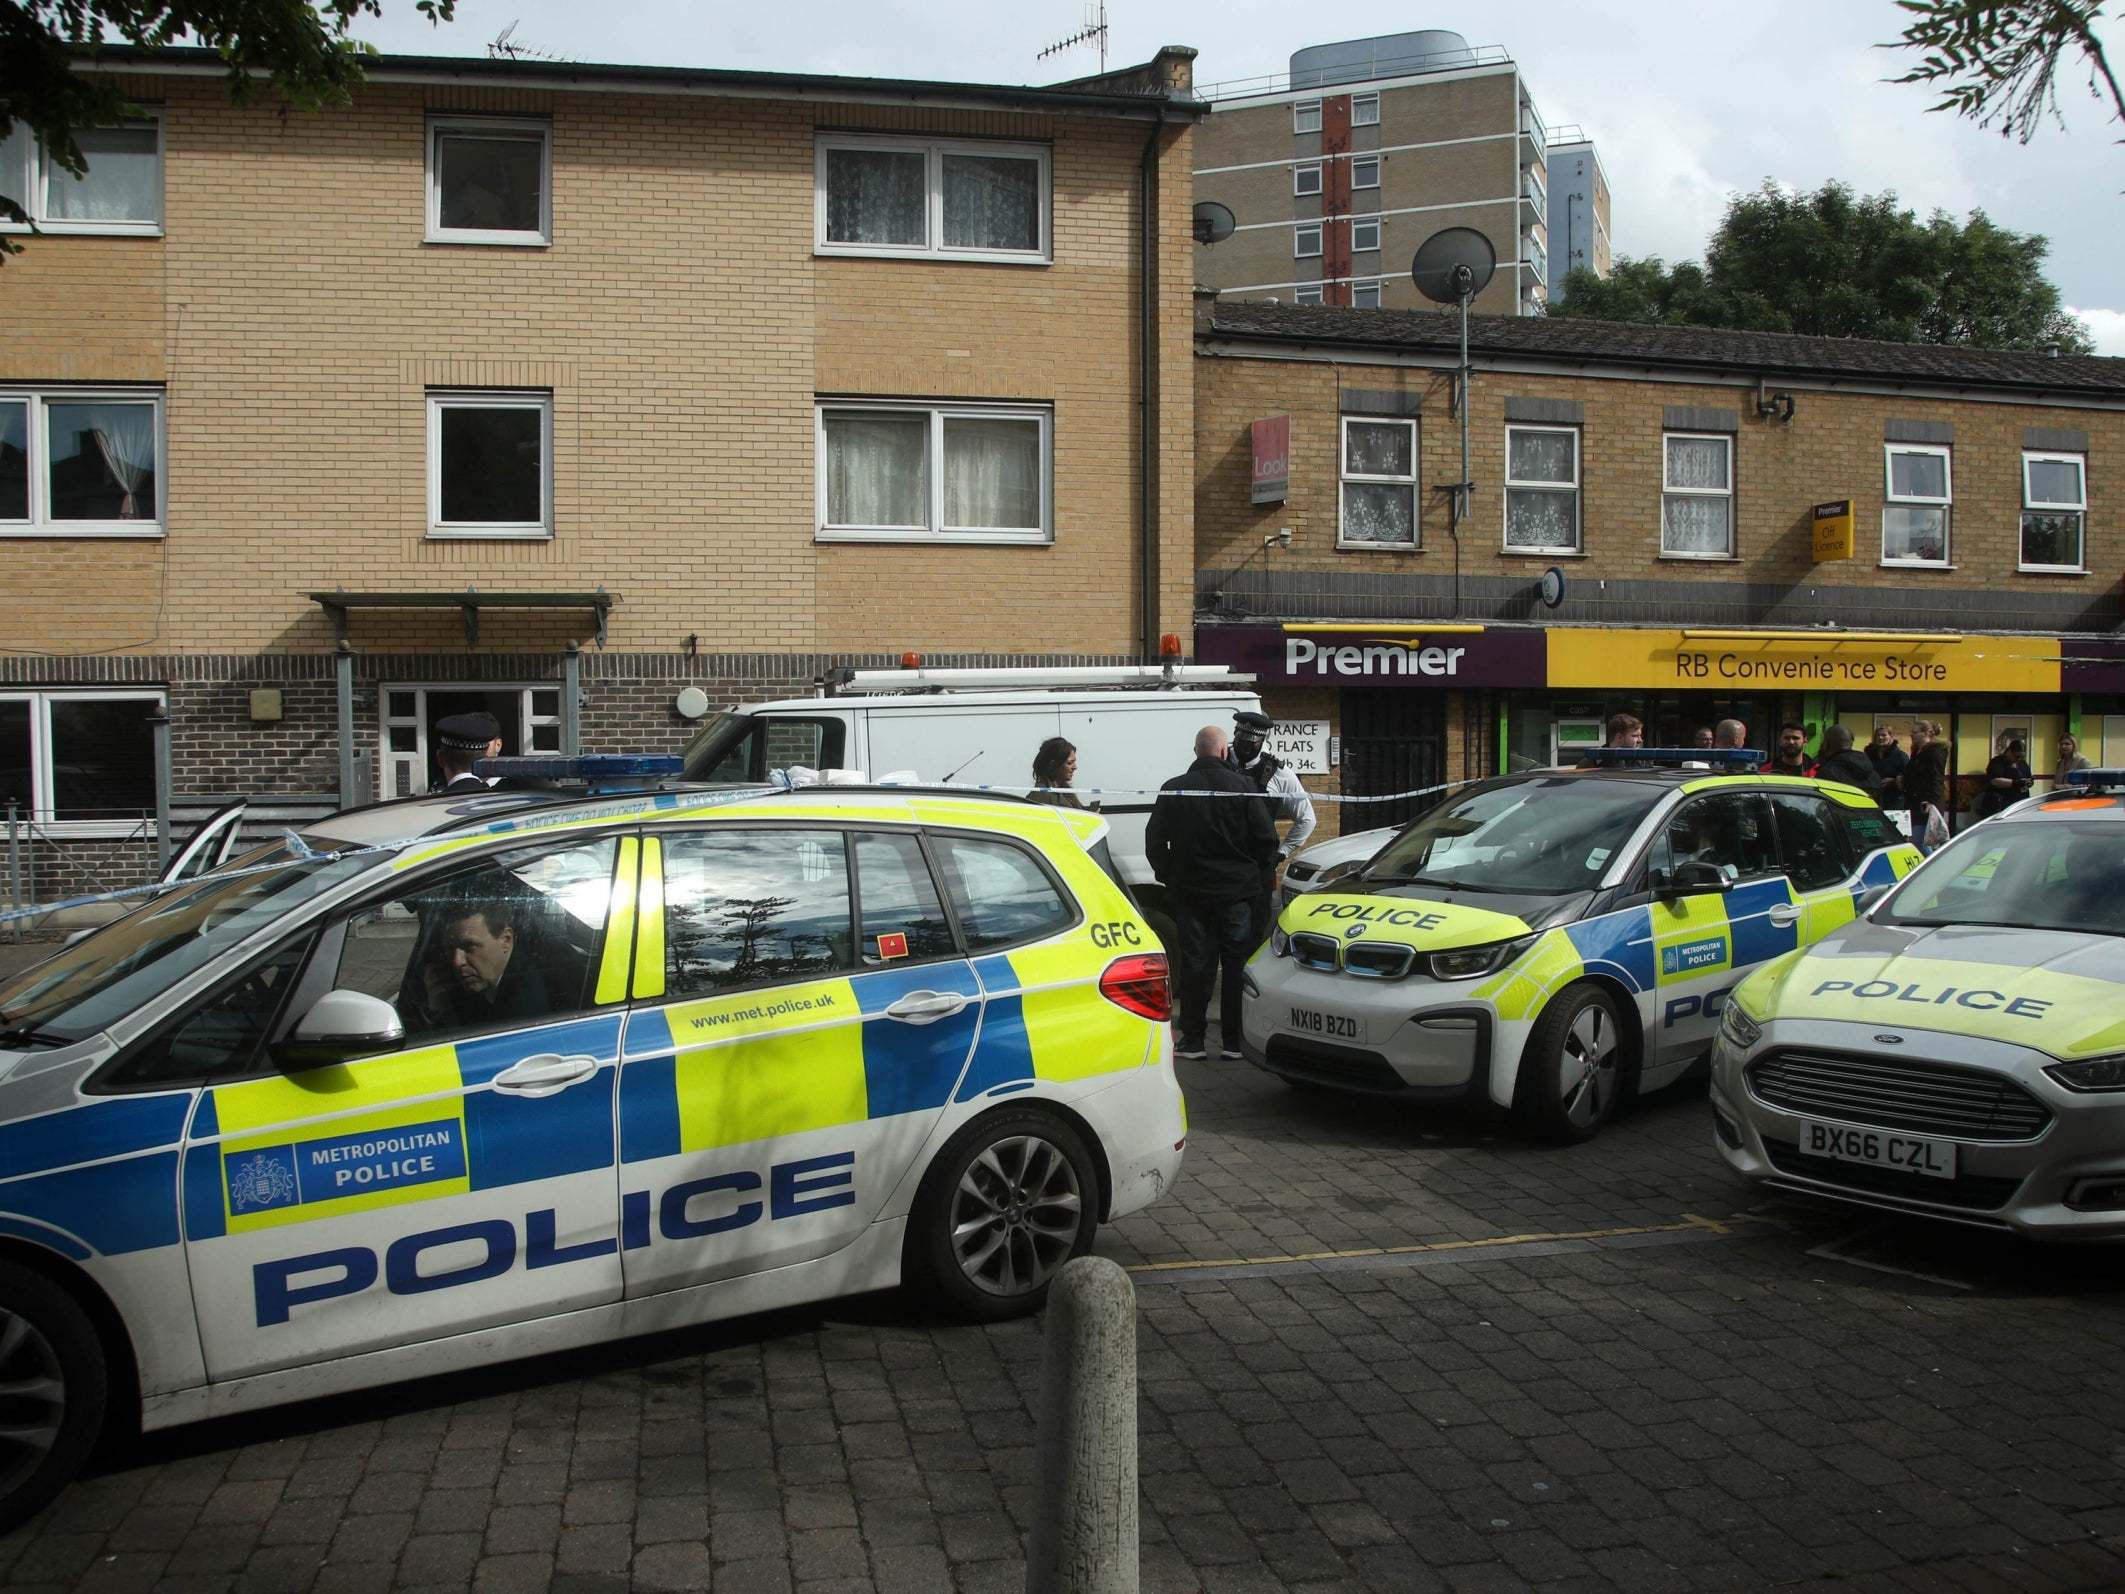 Police officers at the scene of an earlier killing in Tower Hamlets, east London, on Saturday